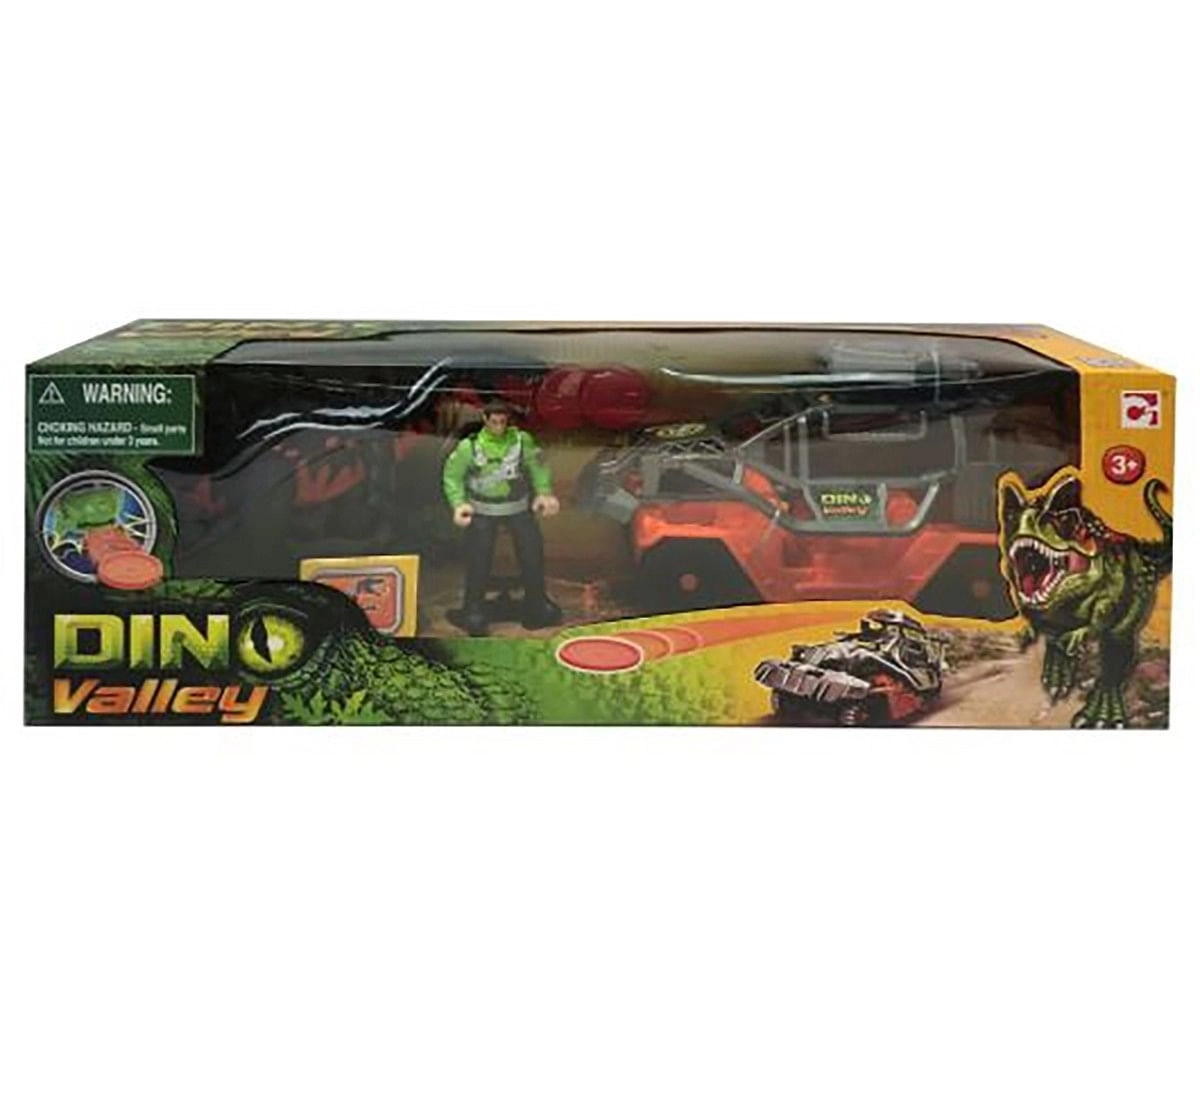 Hamleys Dino Valley Dinosaur Catch Vehicle Playset Action Figure Play Sets for Kids age 3Y+ 